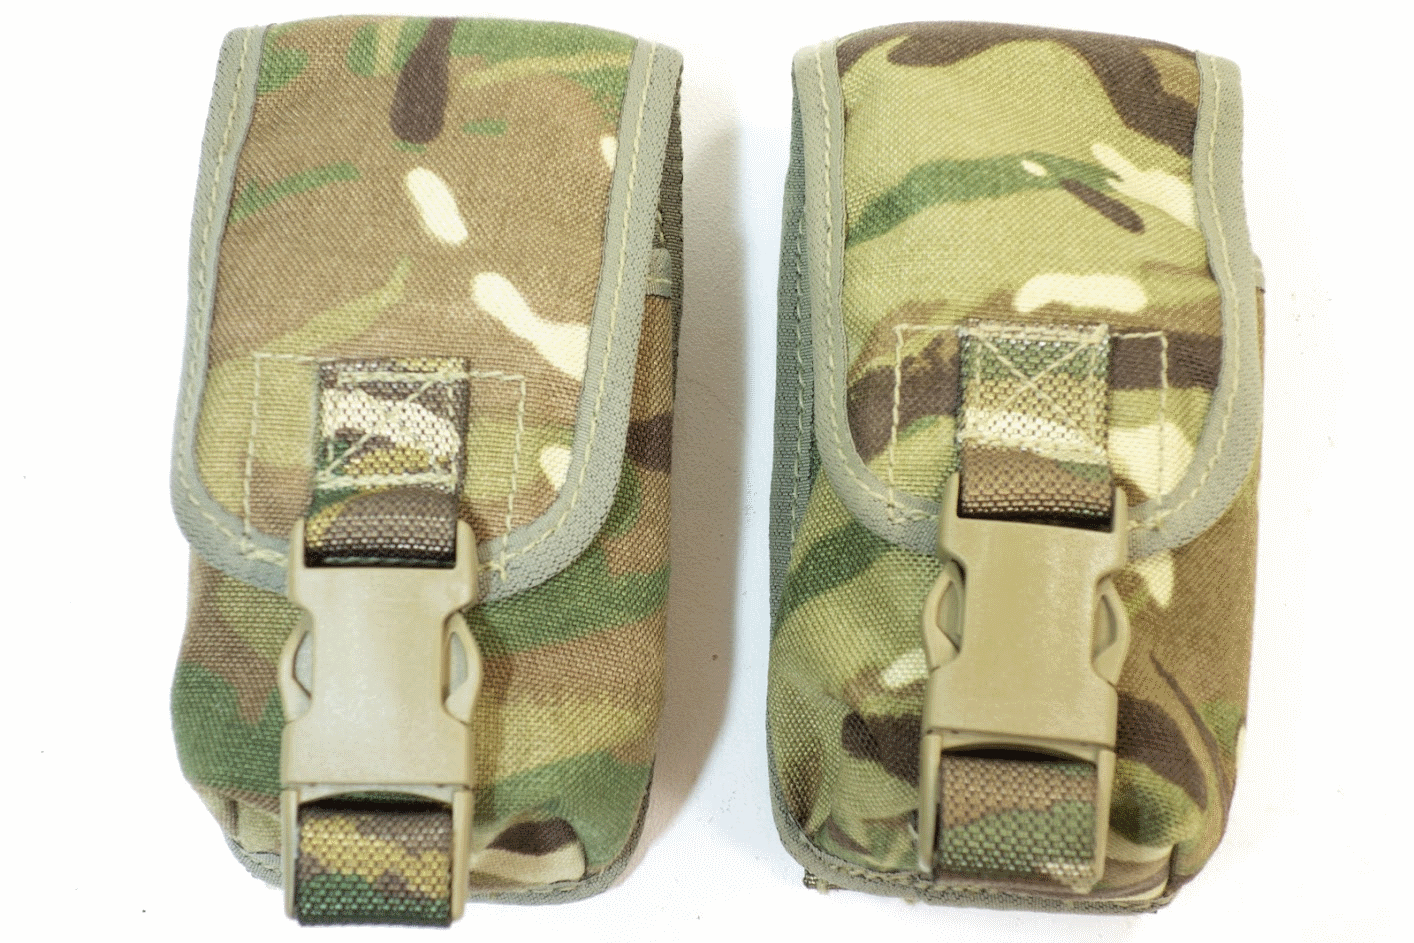 2 x British army surplus large mtp camouflage molle osprey pouches G1